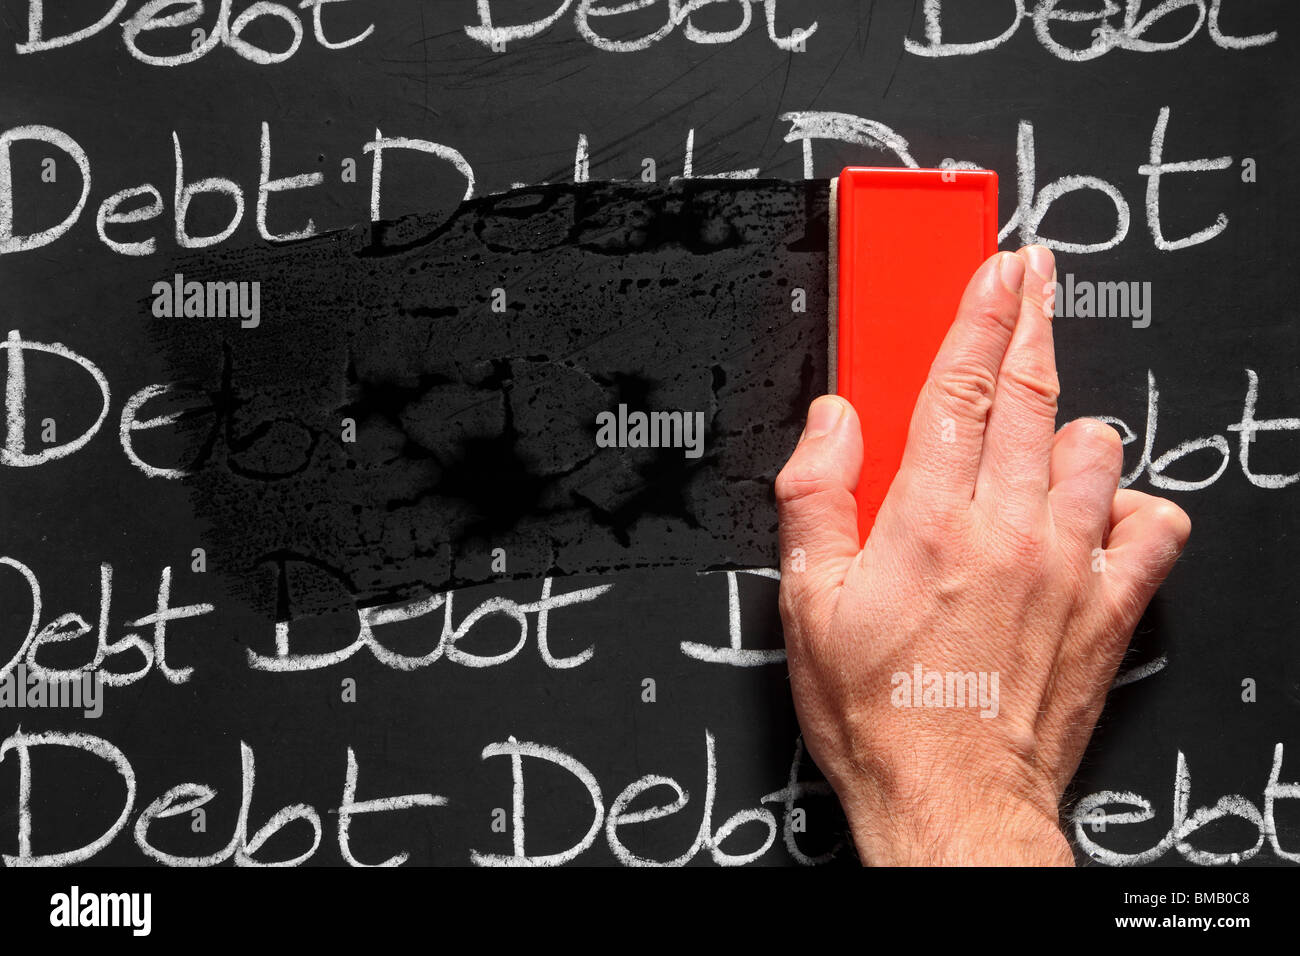 Wiping debts away on a blackboard with a red chalk duster. Stock Photo